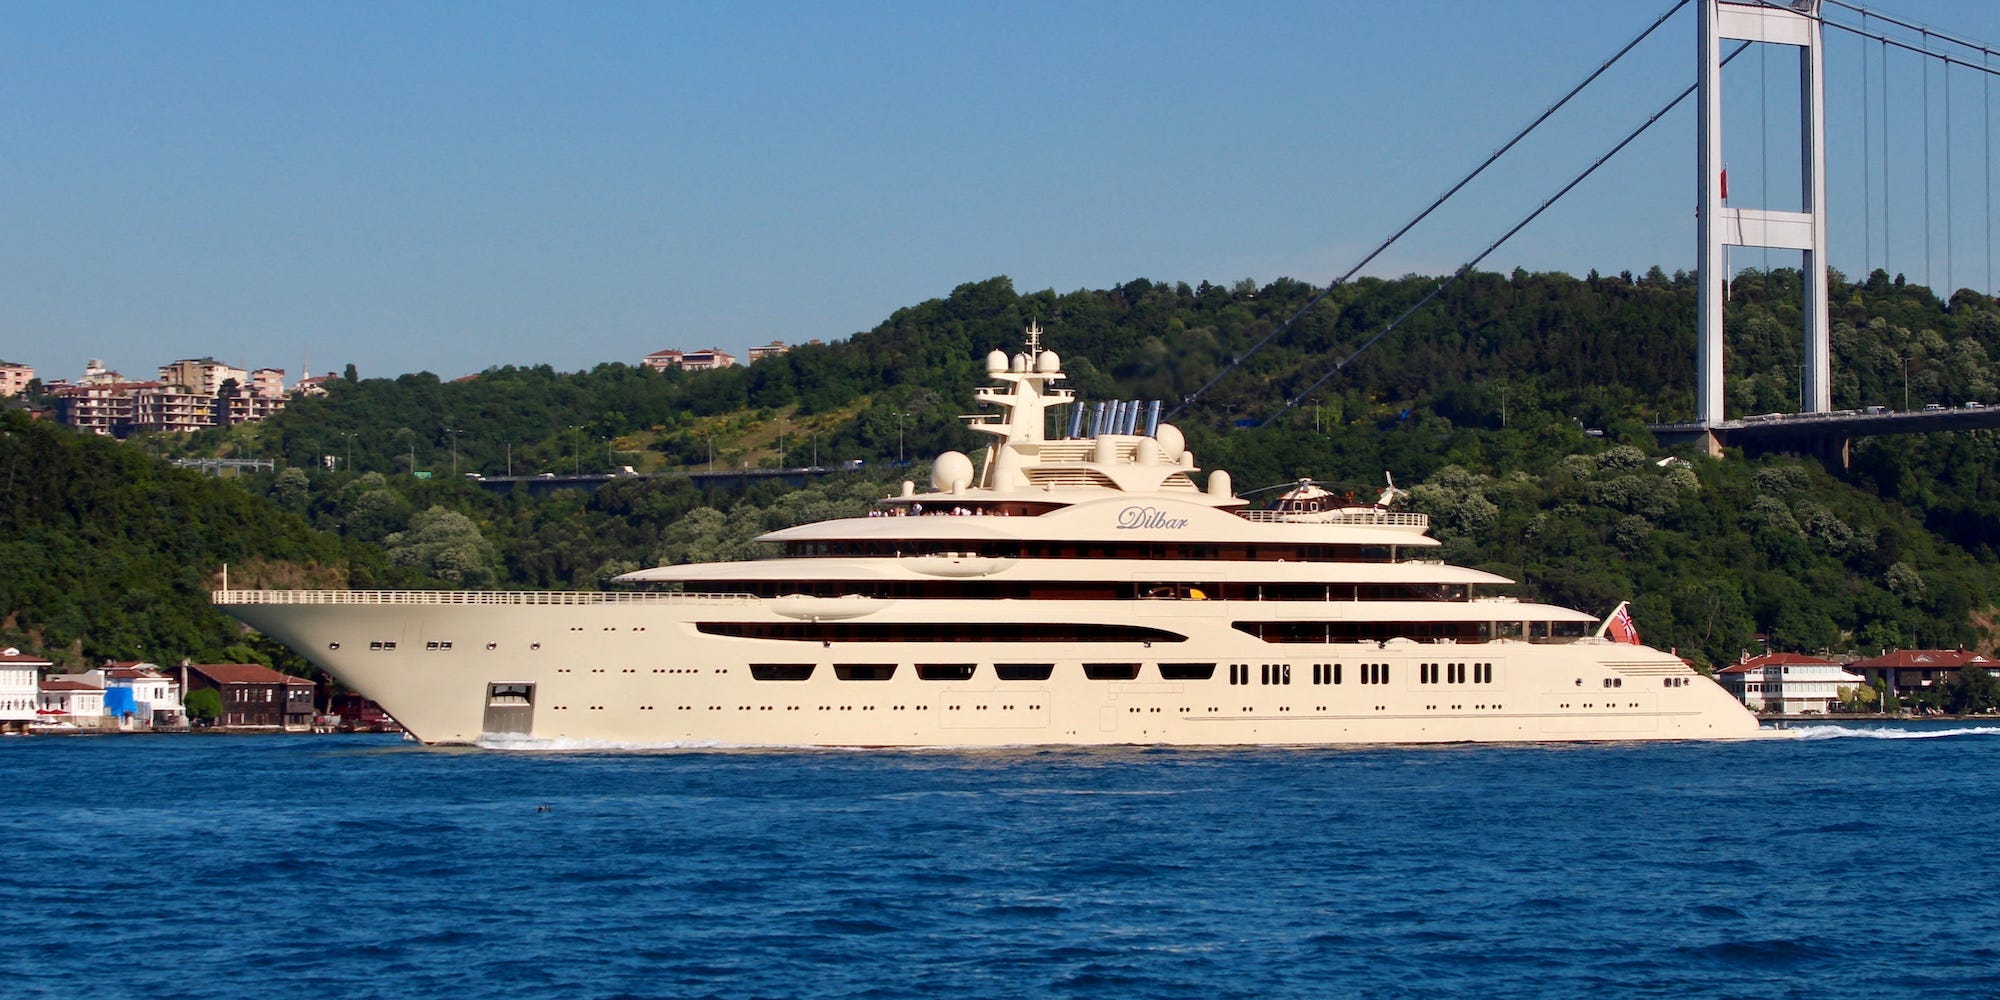 A yacht, the Dilbar, owned by Alisher Usmanov, is seen against a blue sea and sky in the Bosphorus in 2019.